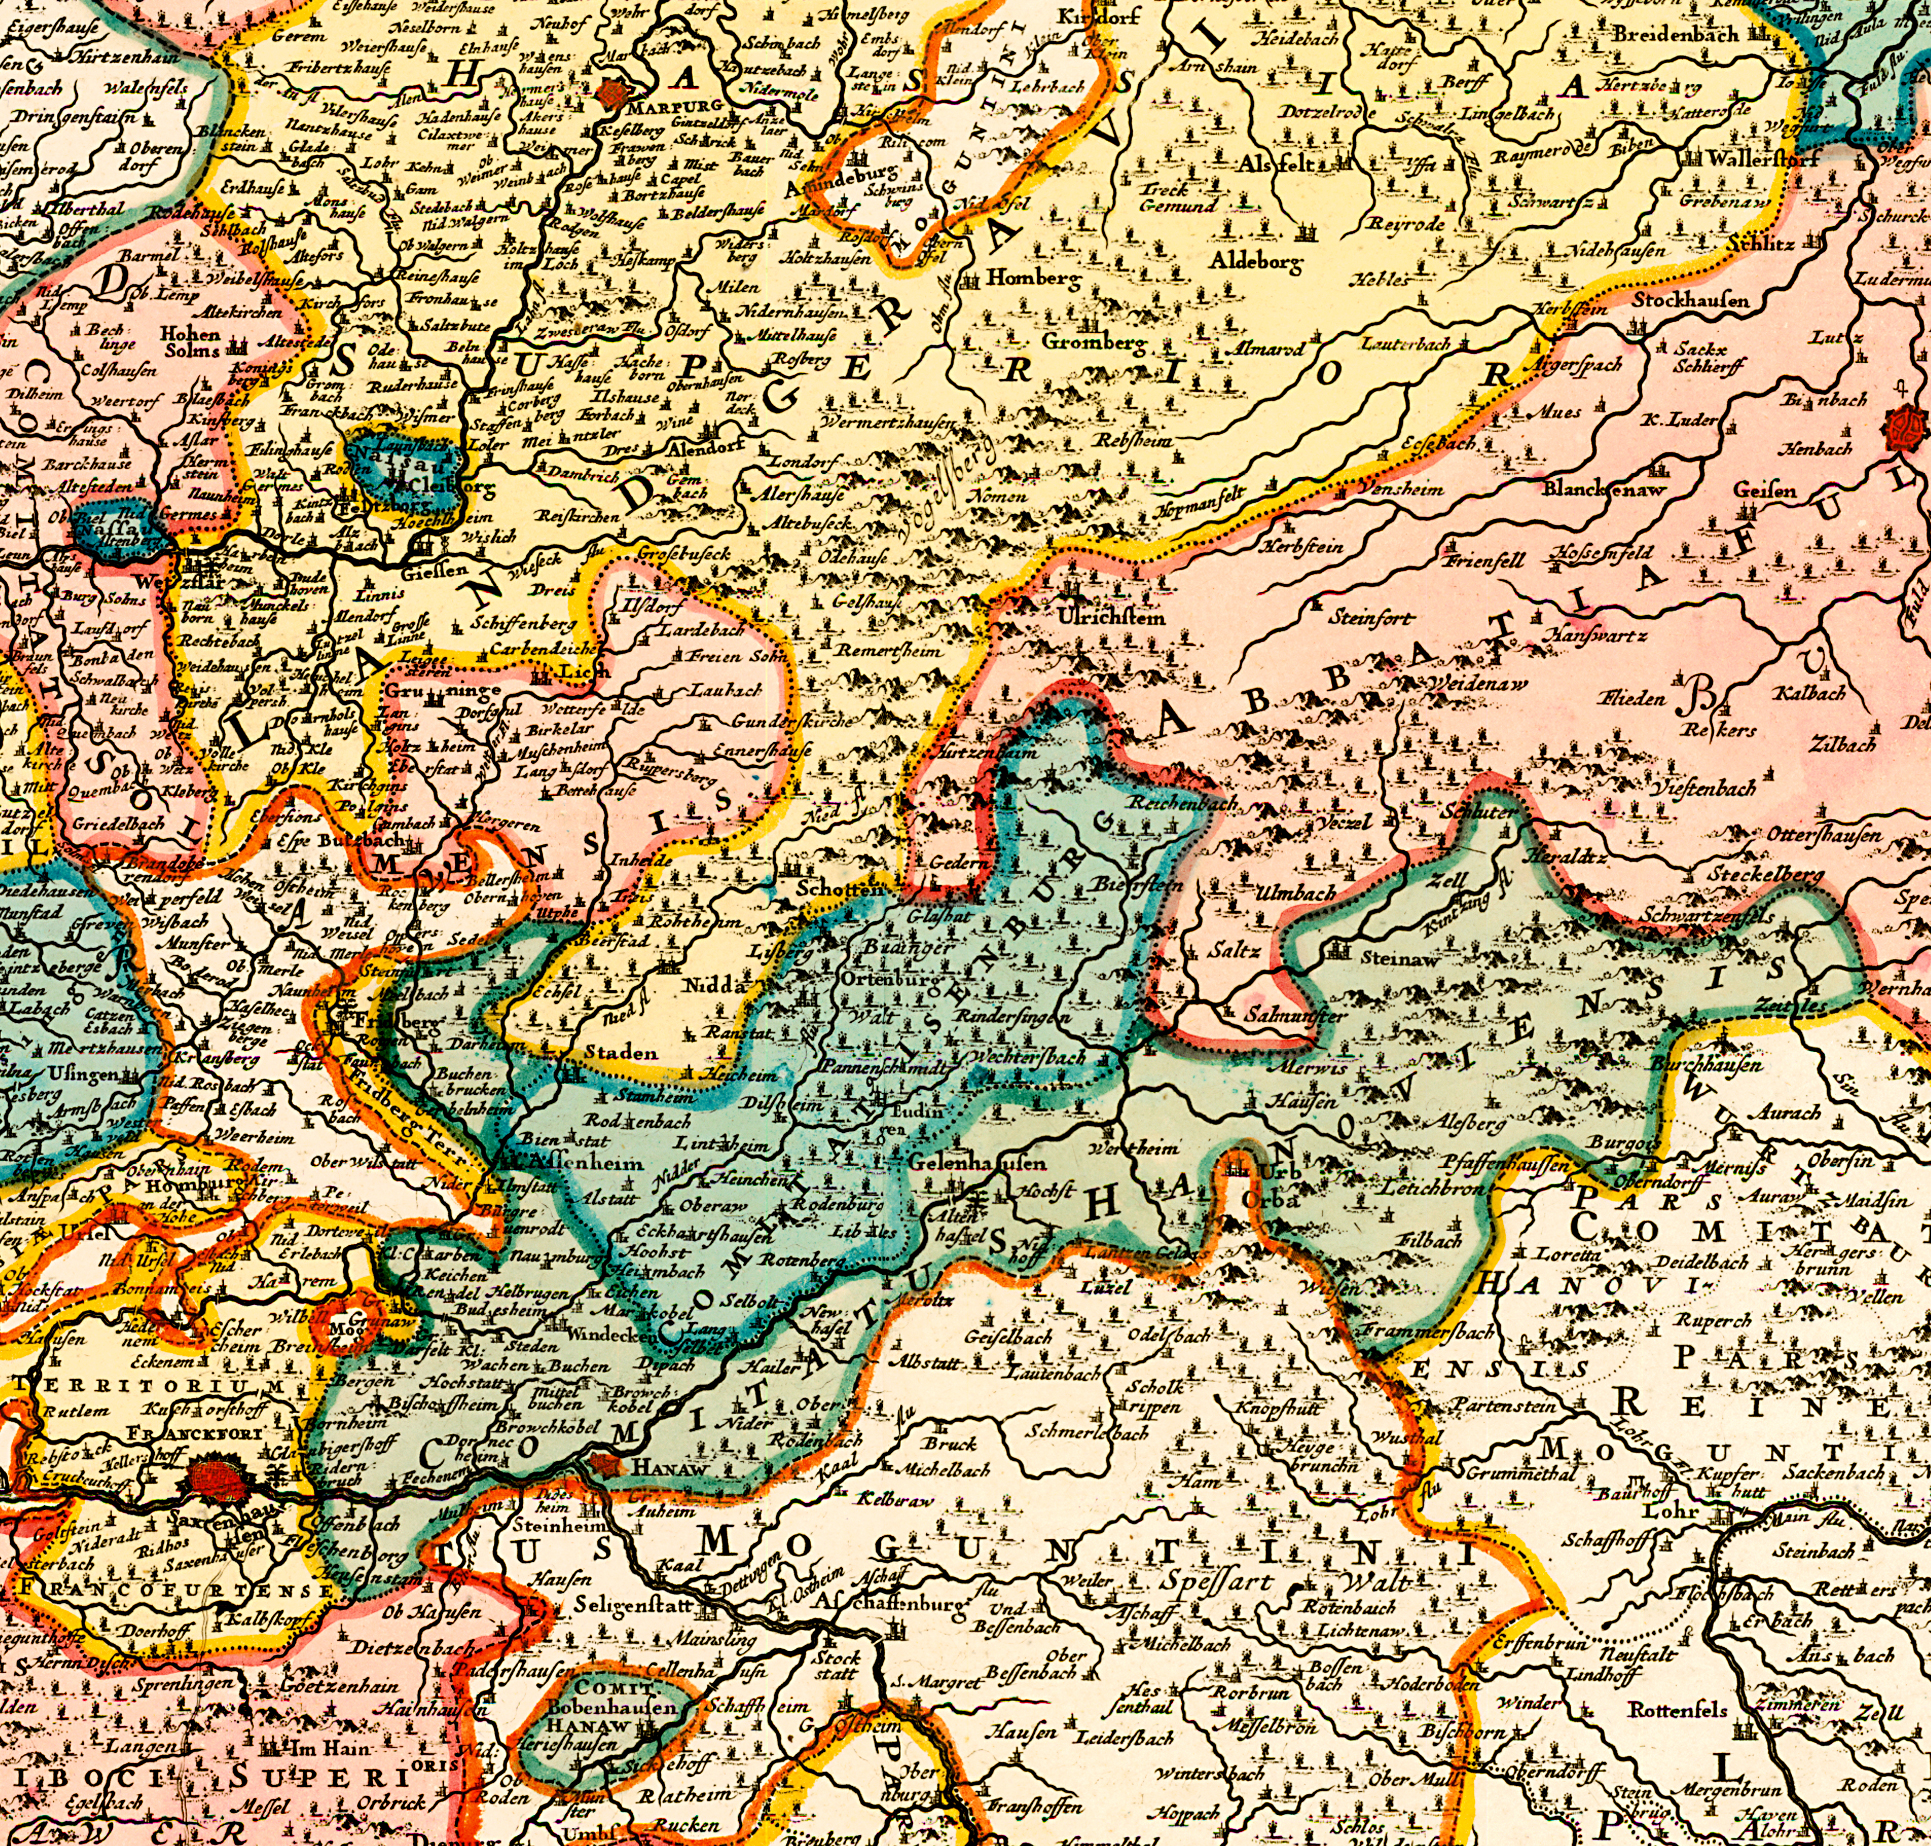 1760s map showing County of Isenburg